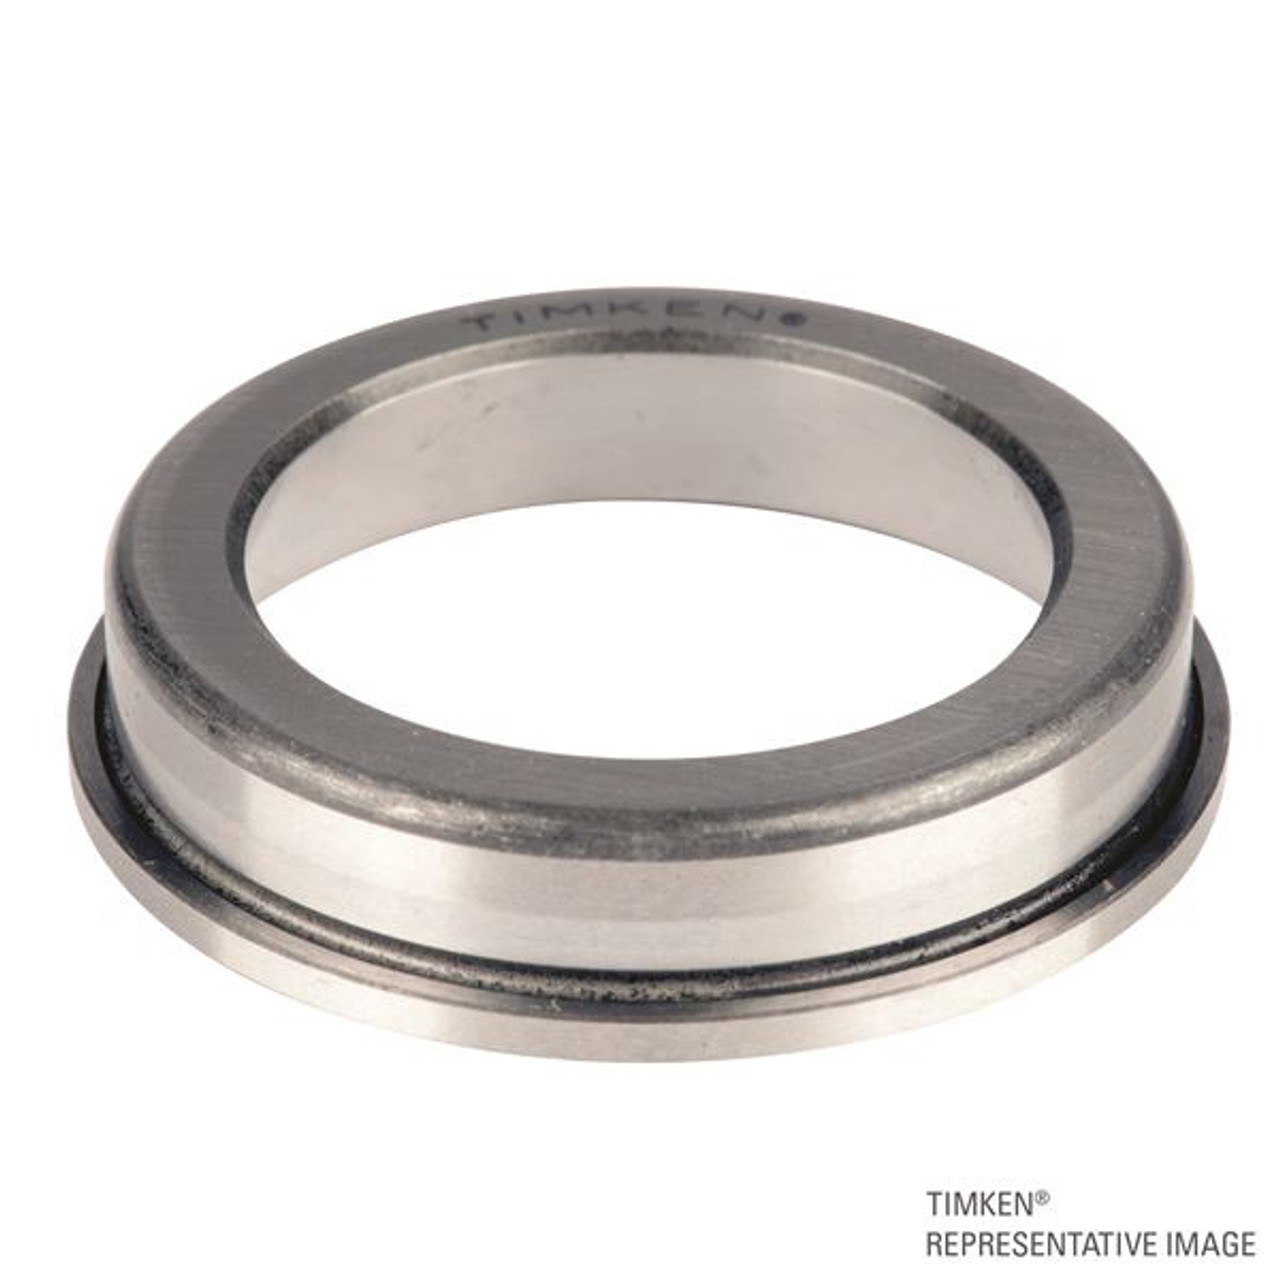 Timken® Single Row Flanged Cup  LM654610B-2